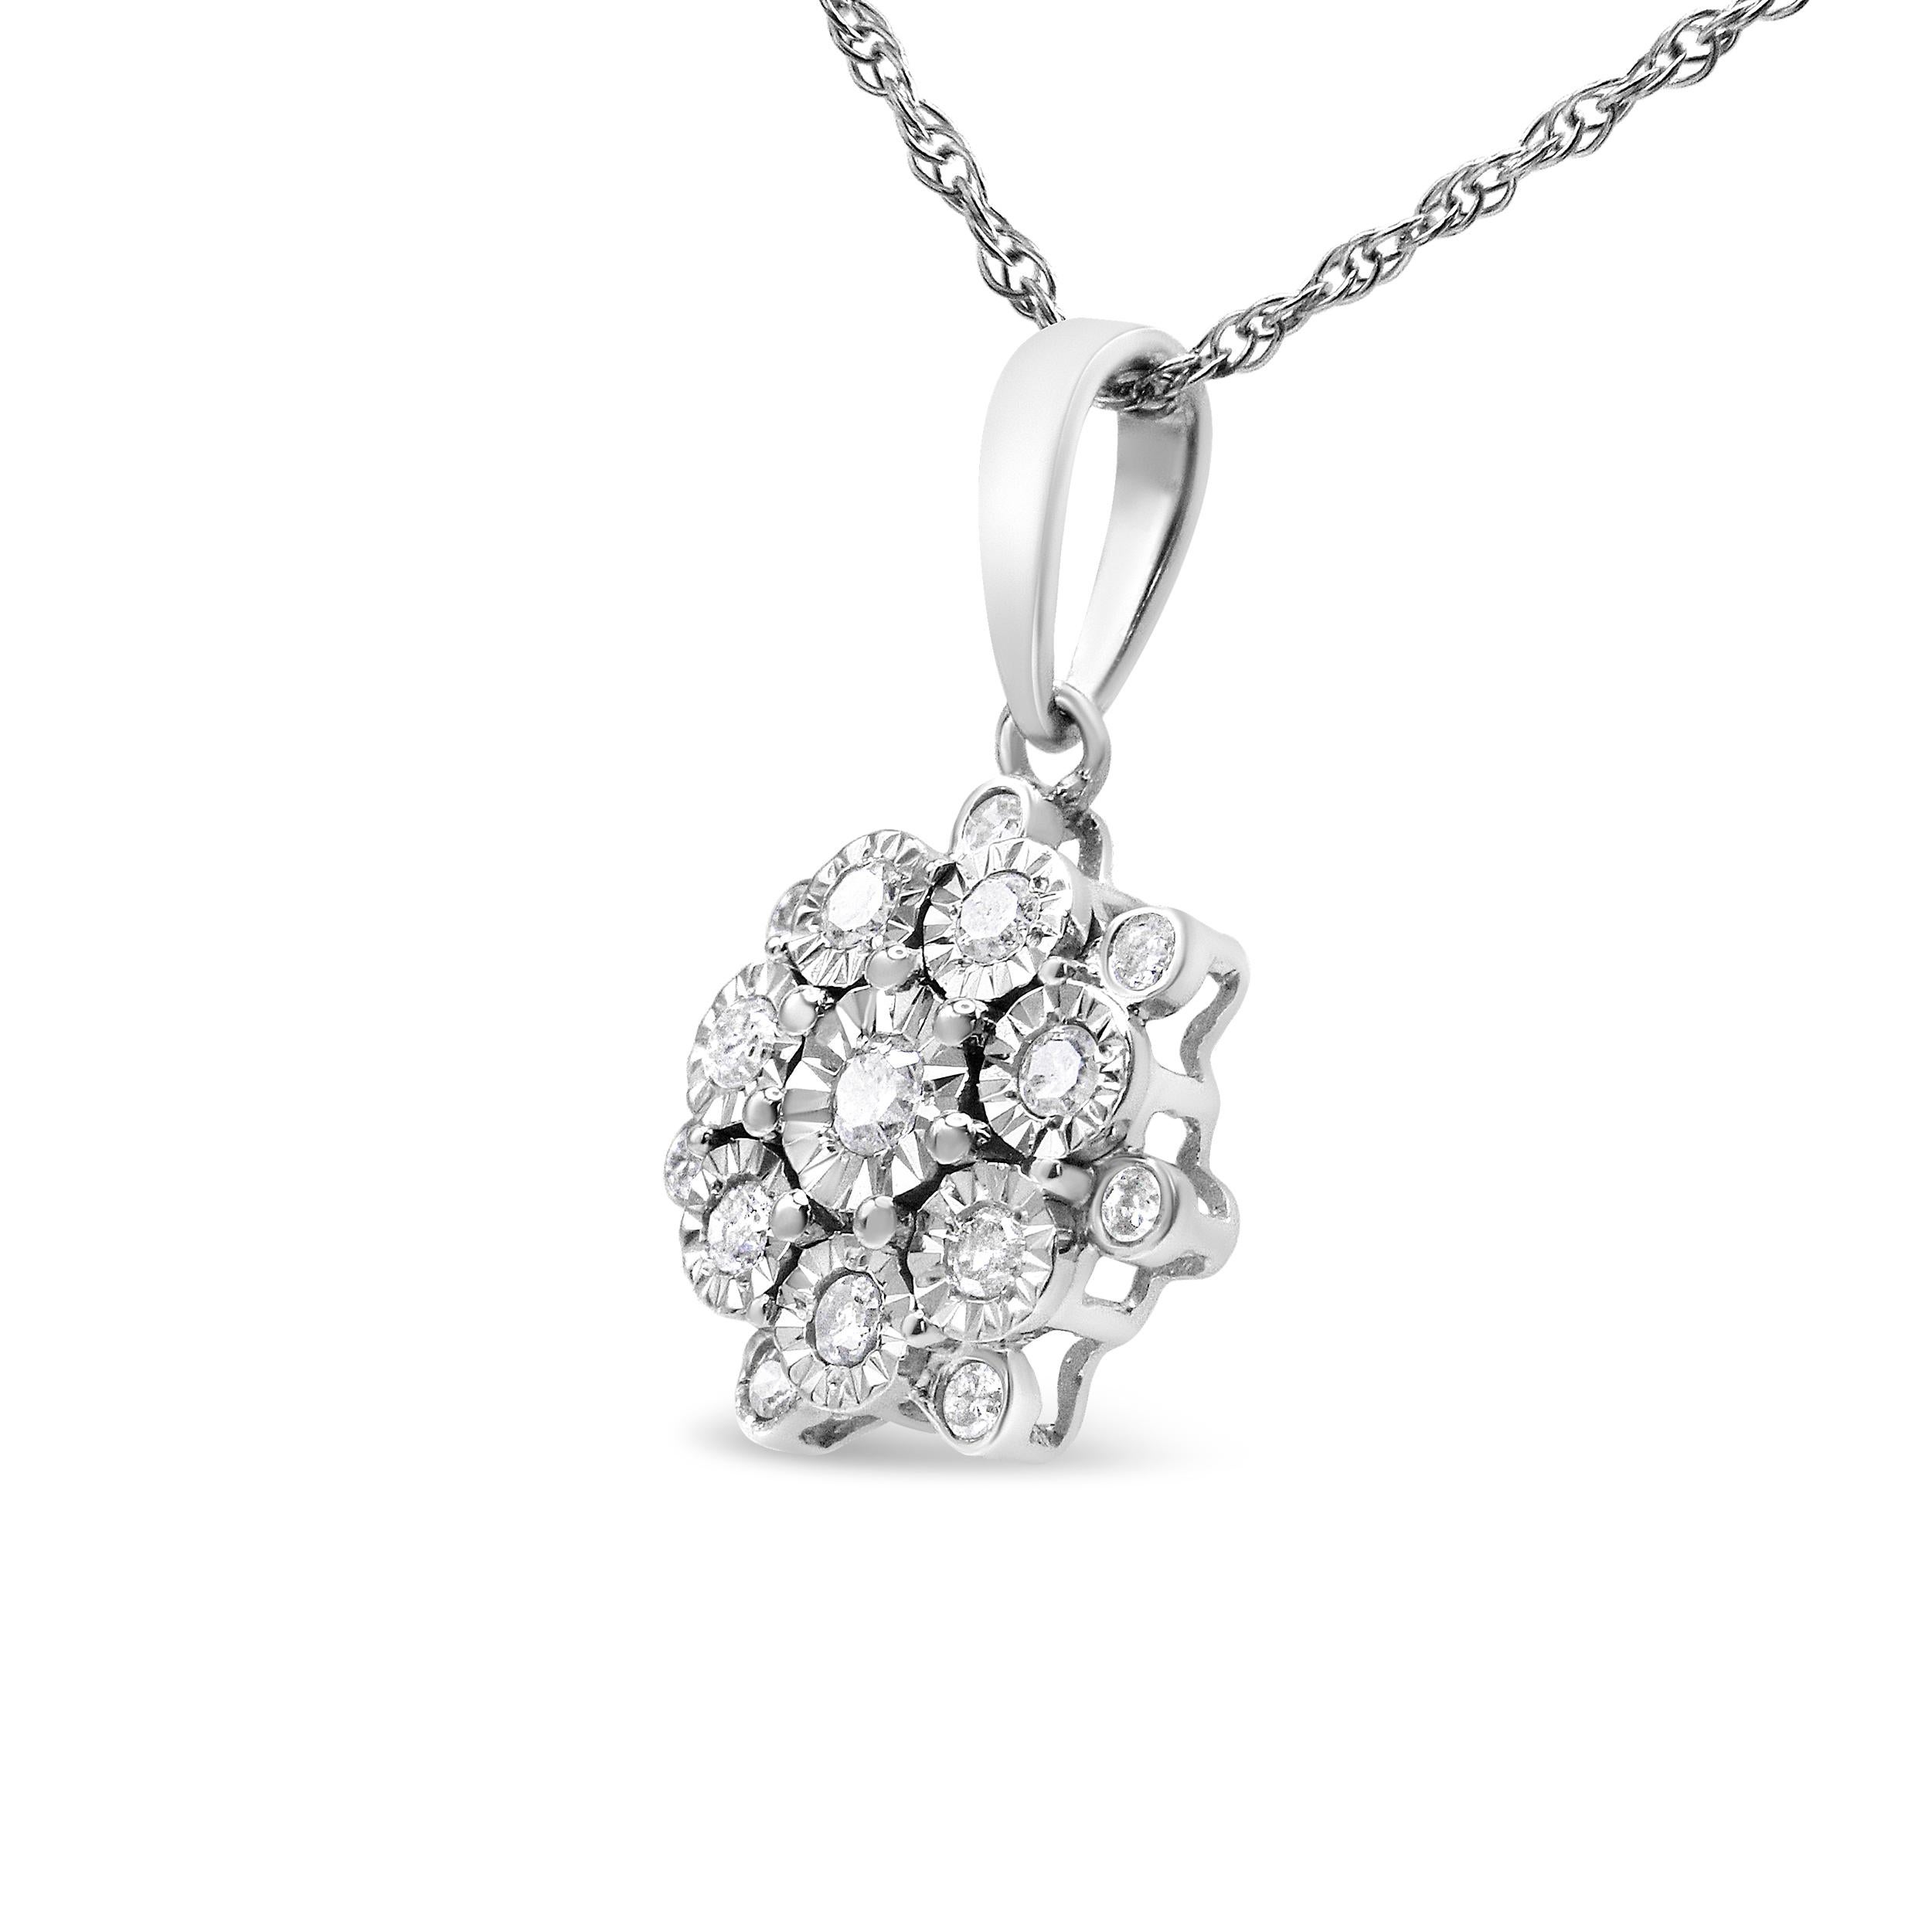 This diamond floral cluster pendant is an elegant accessory for any event. Embellished with 1/4ct TDW of promo quality, round cut diamonds in bezel and miracle settings add extra shine. The pendant is crafted in sterling silver and delicately